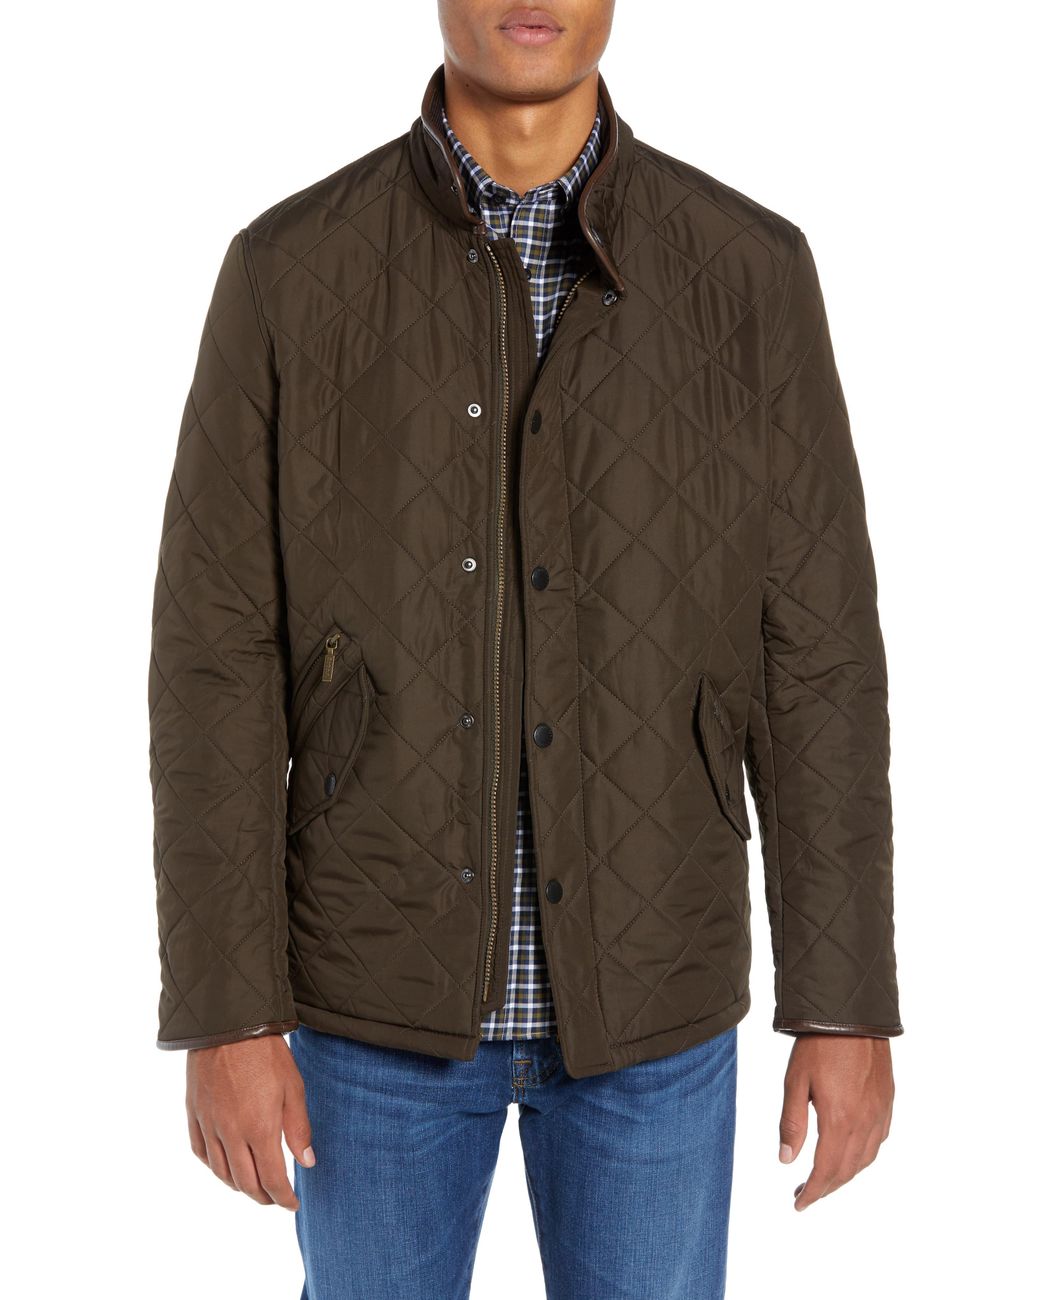 Barbour 'powell' Regular Fit Quilted Jacket in Green for Men - Lyst